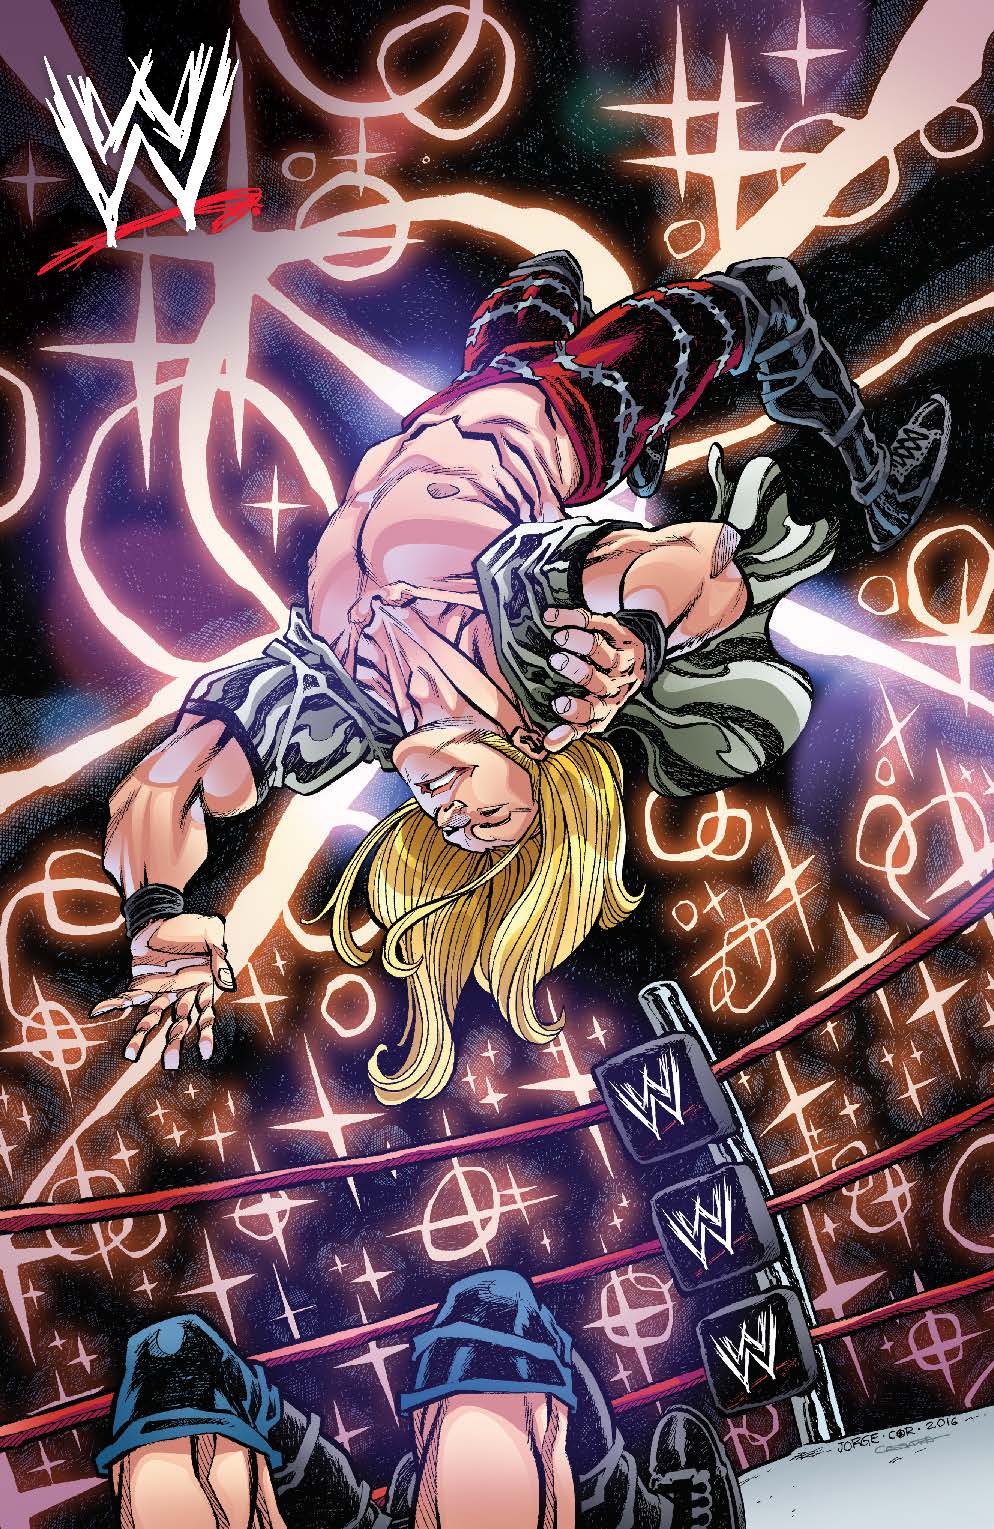 BOOM! Preview: WWE #4